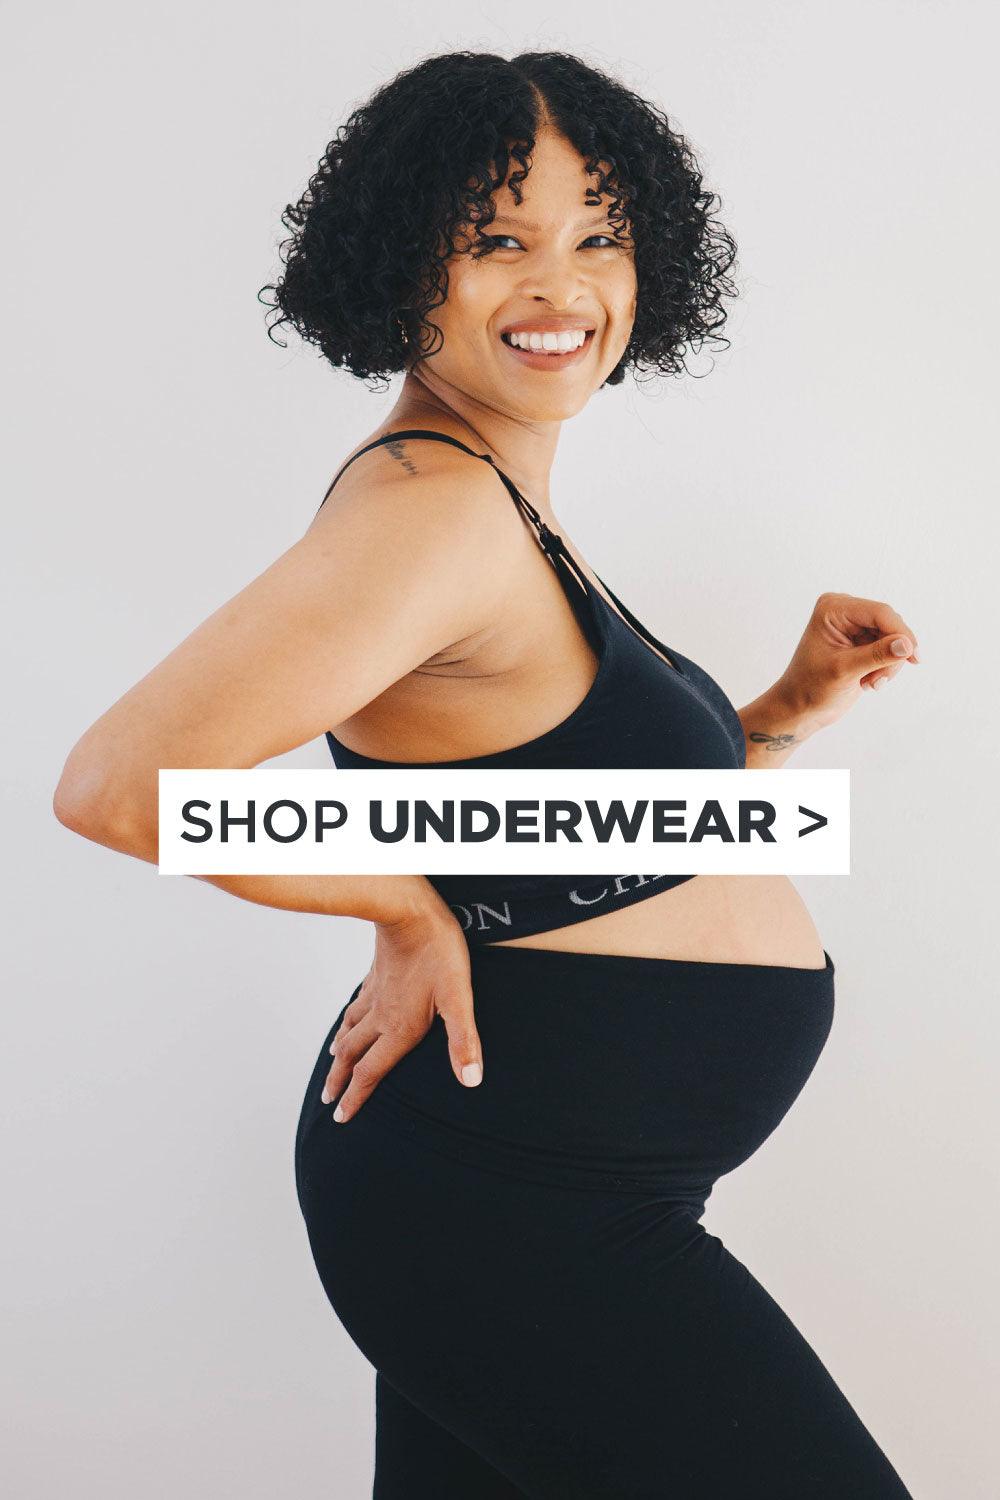 Maternity Underwear: Cherry Melon's Comfortable & Supportive Options